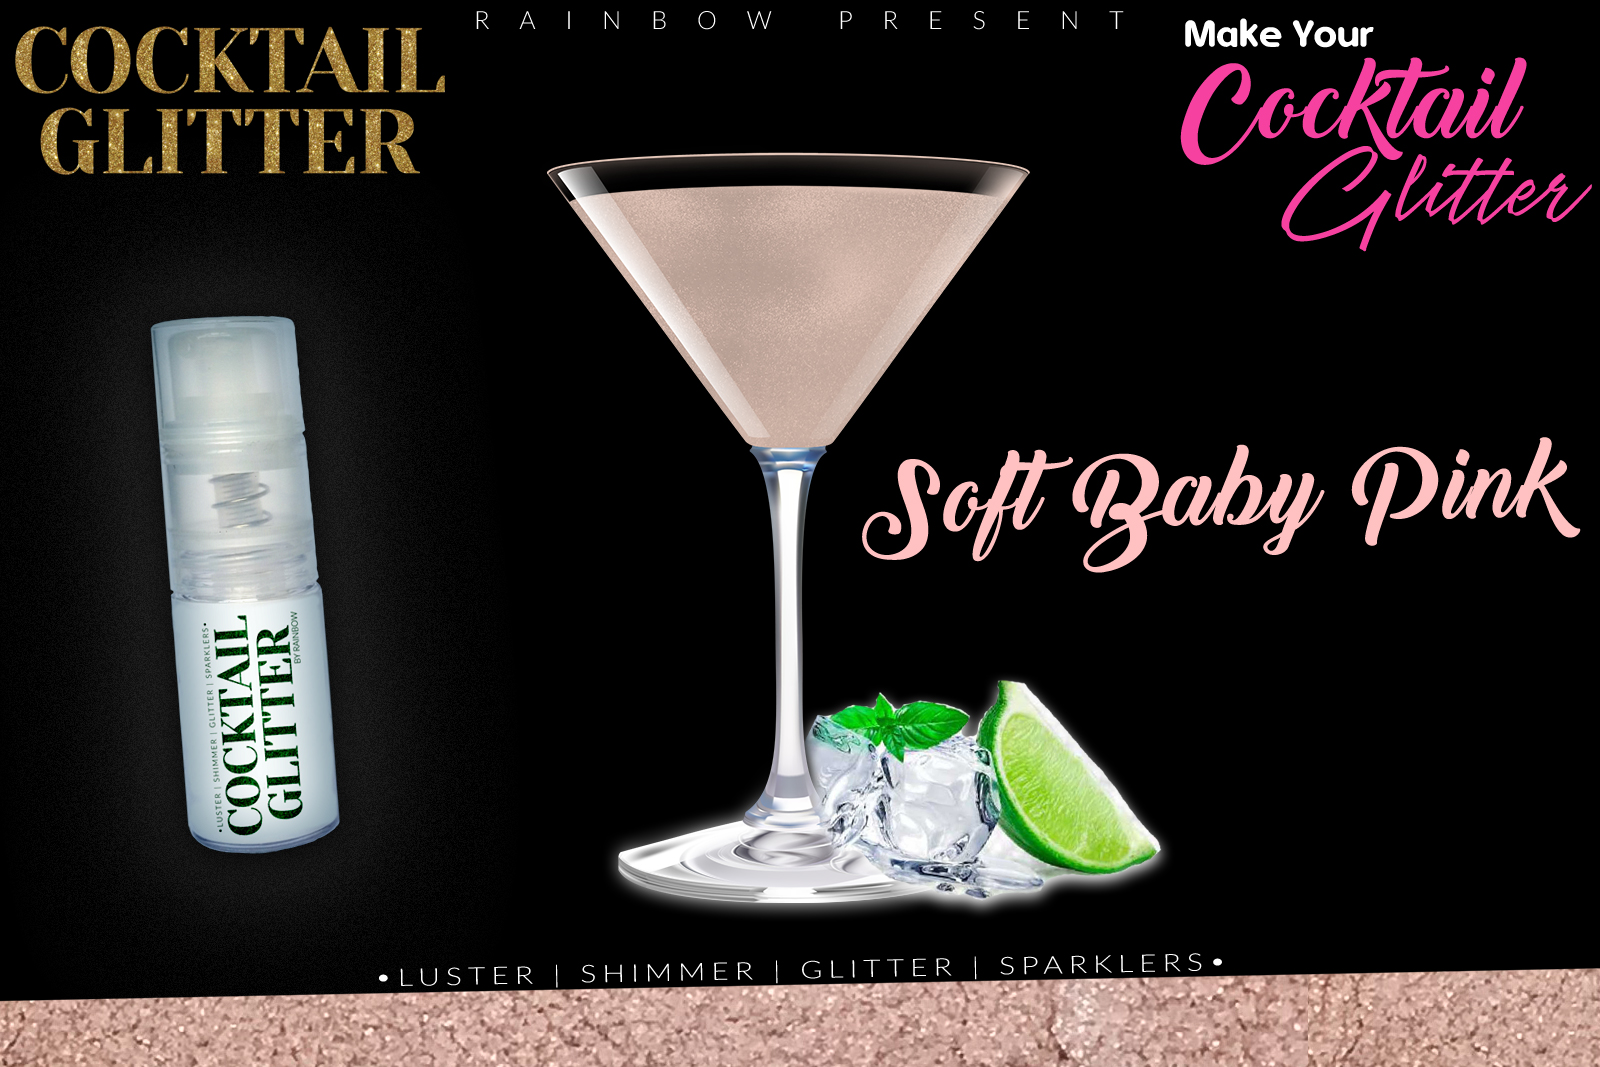 Glitzy Cocktail Glitter and Sparkling Effect | Edible | Soft Pink